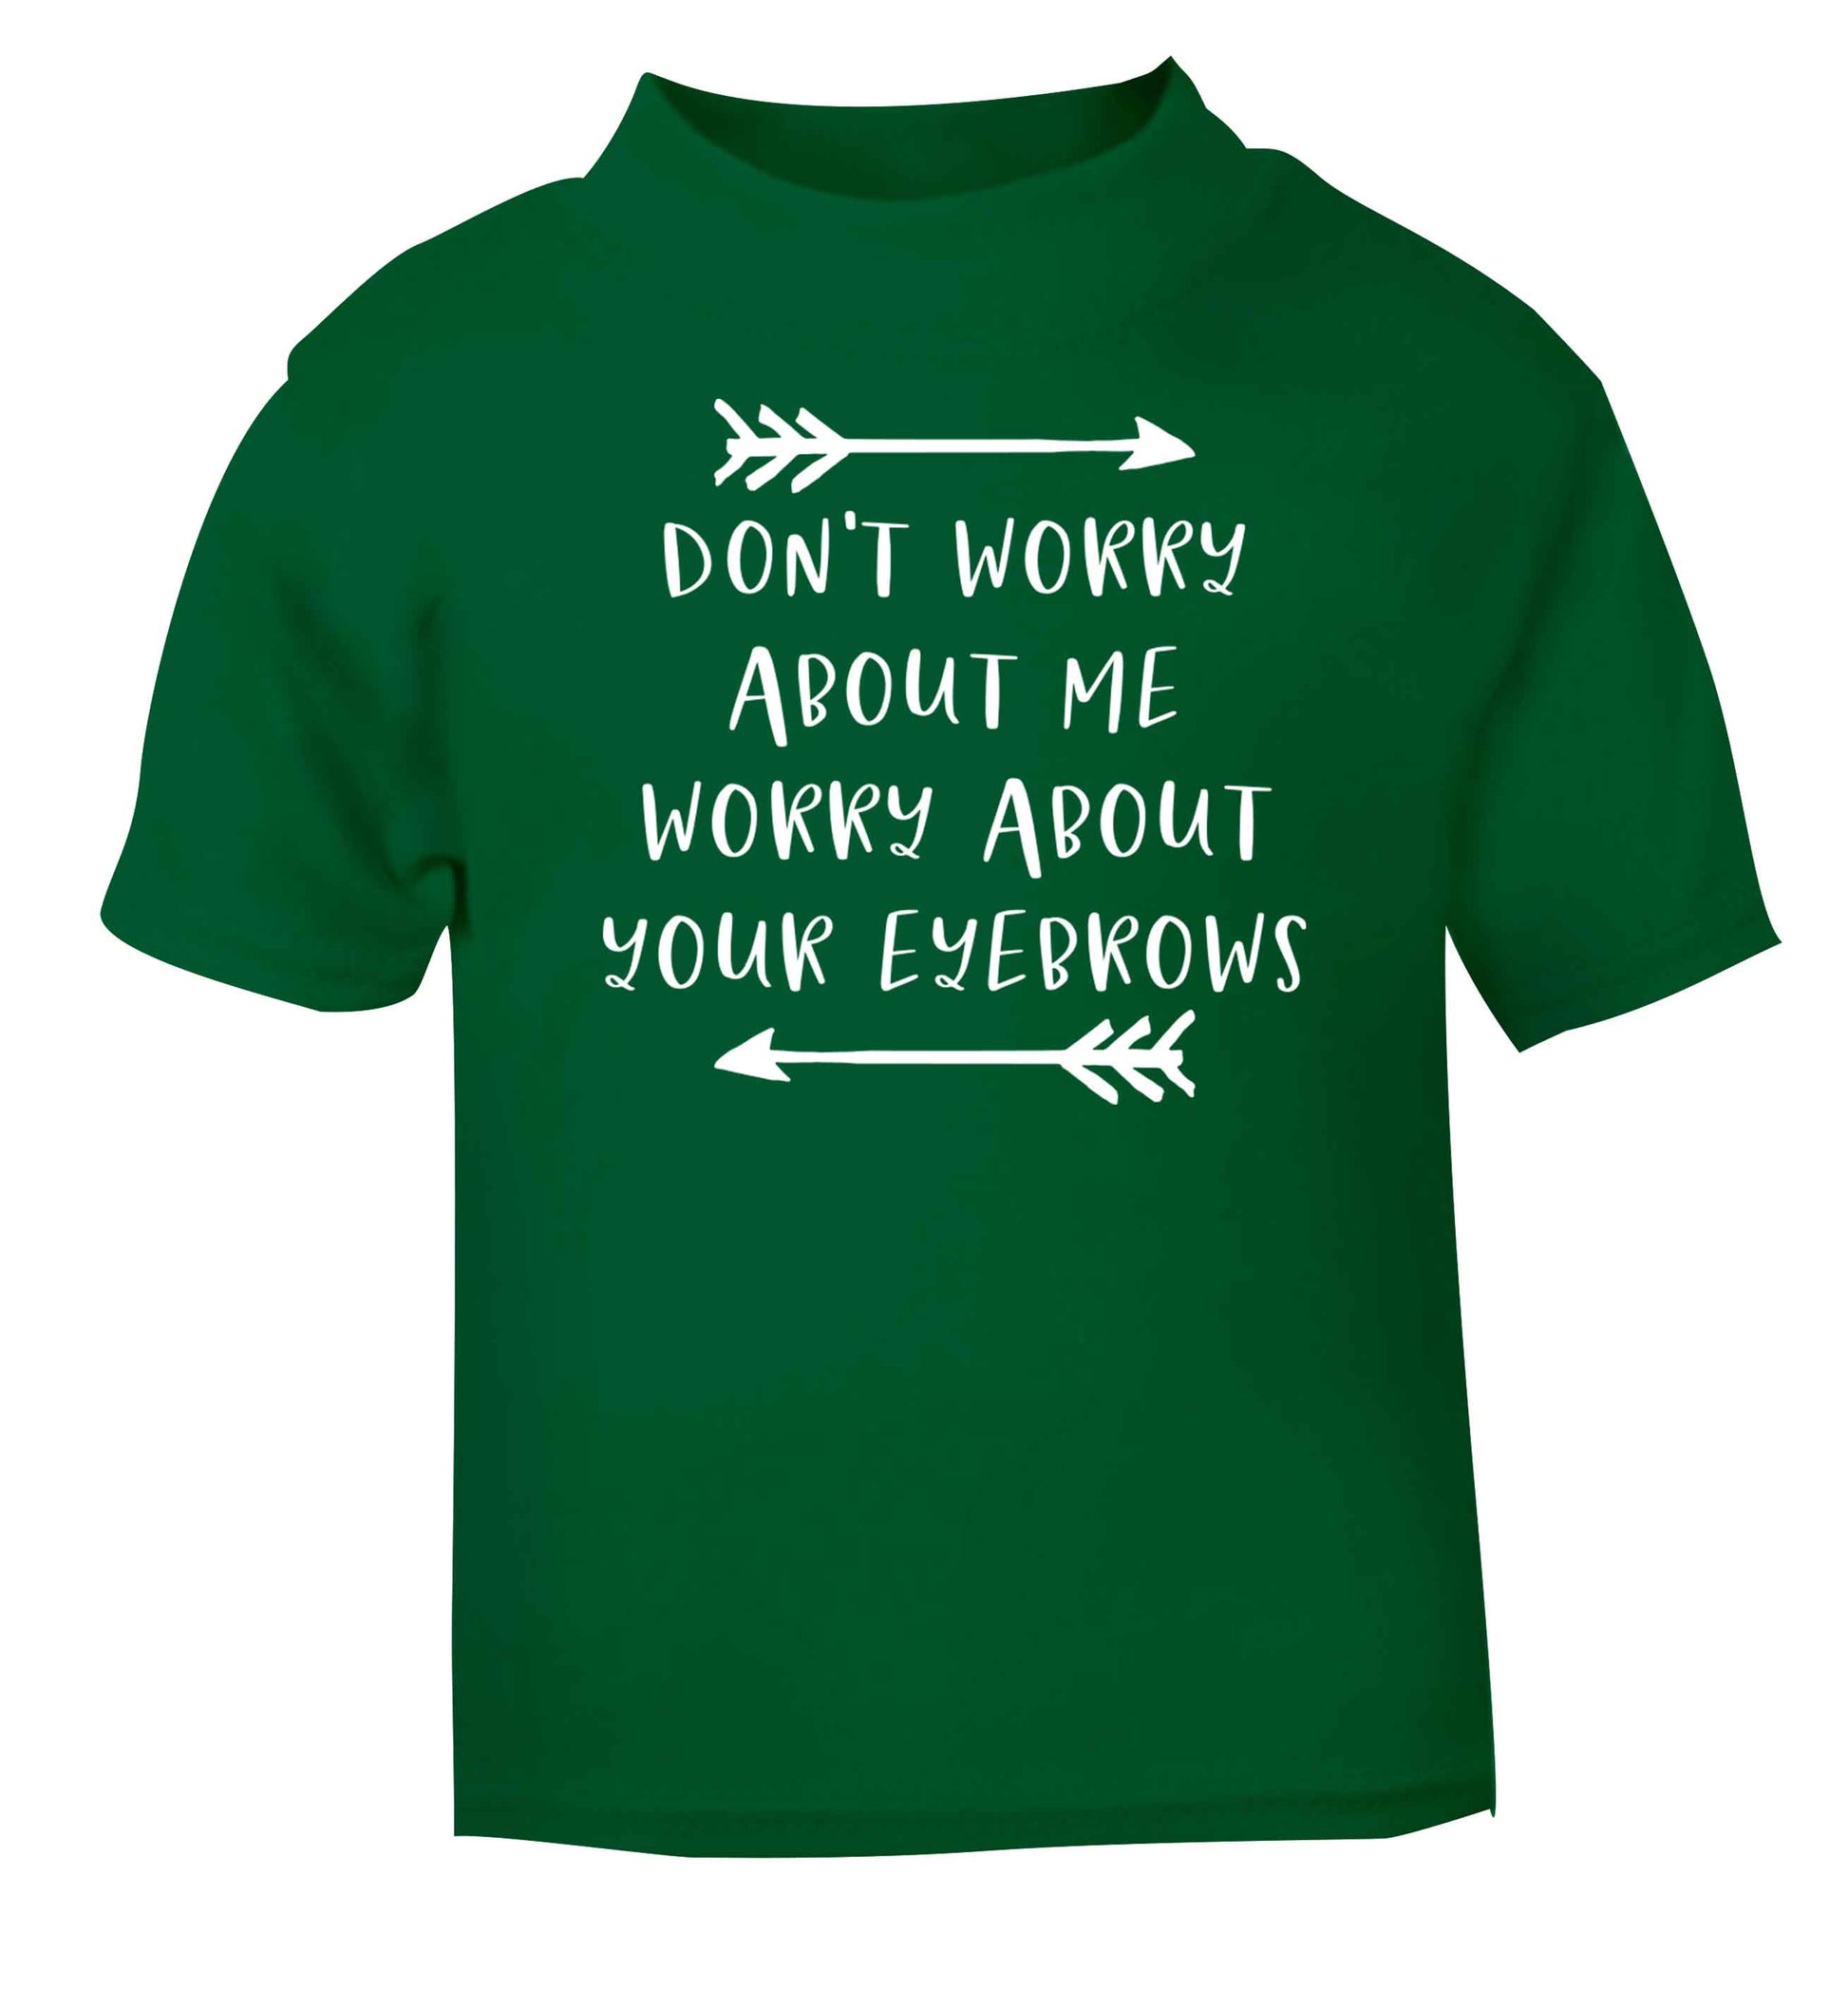 Don't worry about me worry about your eyebrows green baby toddler Tshirt 2 Years